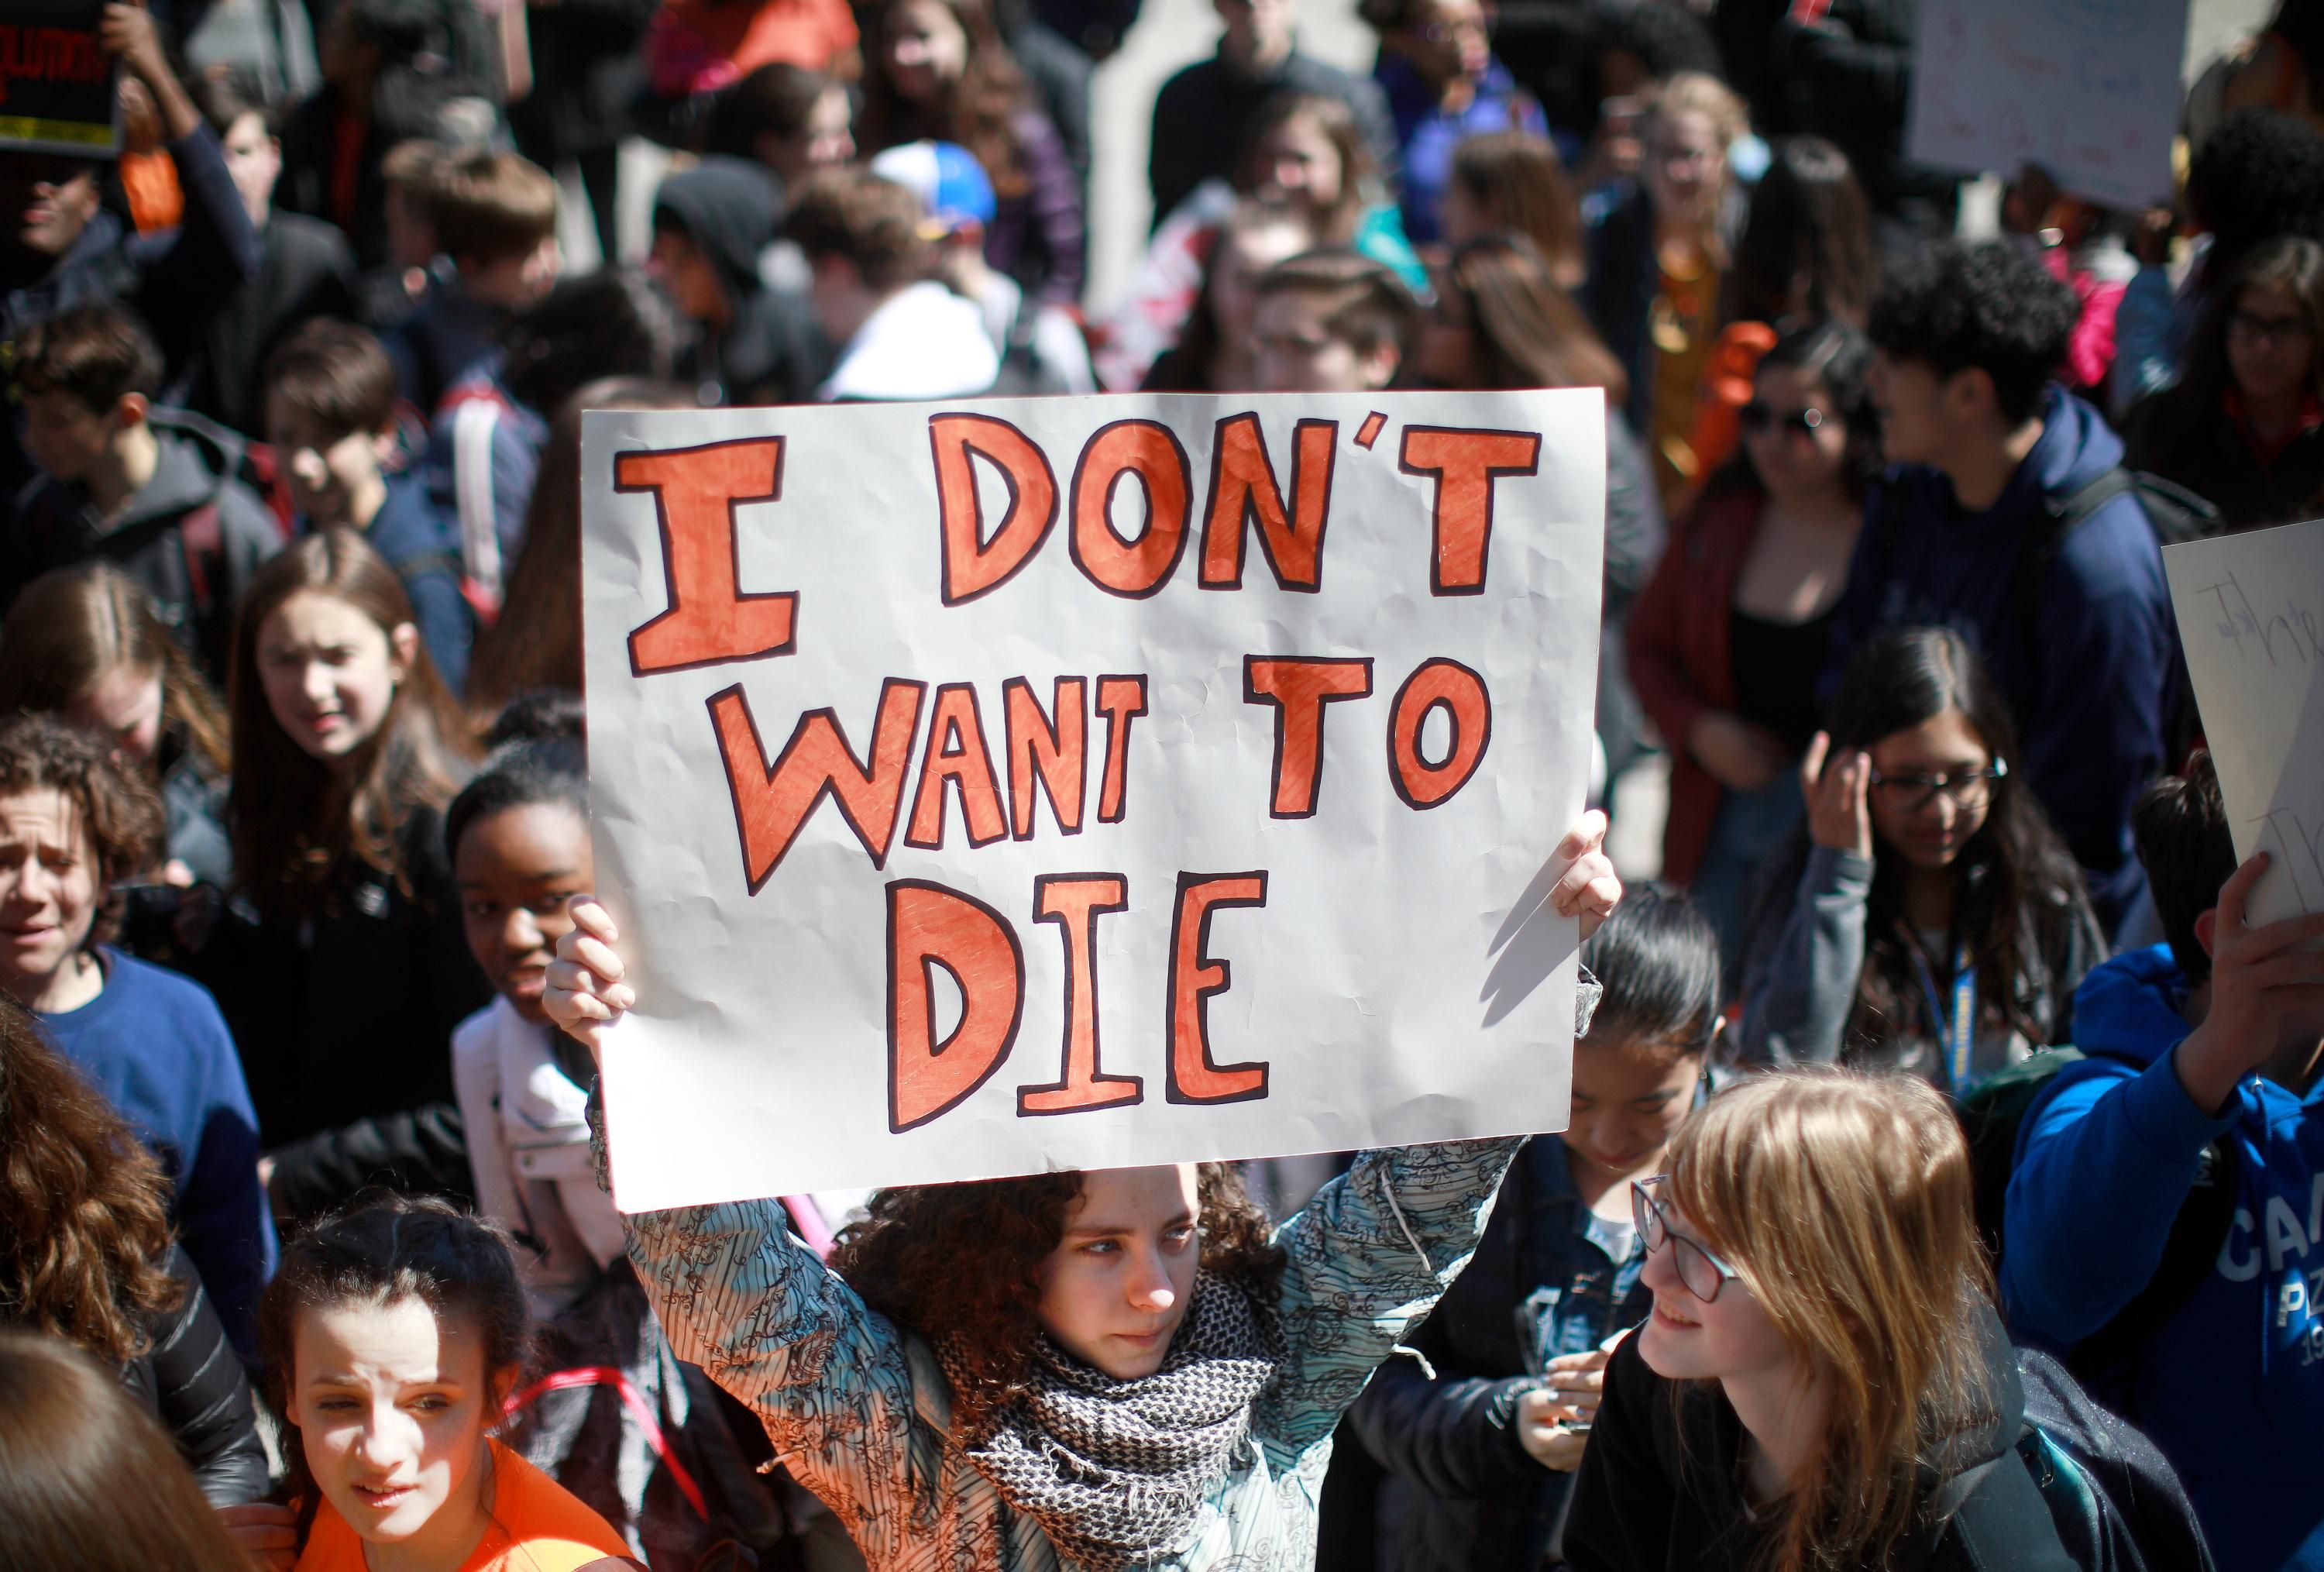 Sign reading "I don't want to die" at gun control protest